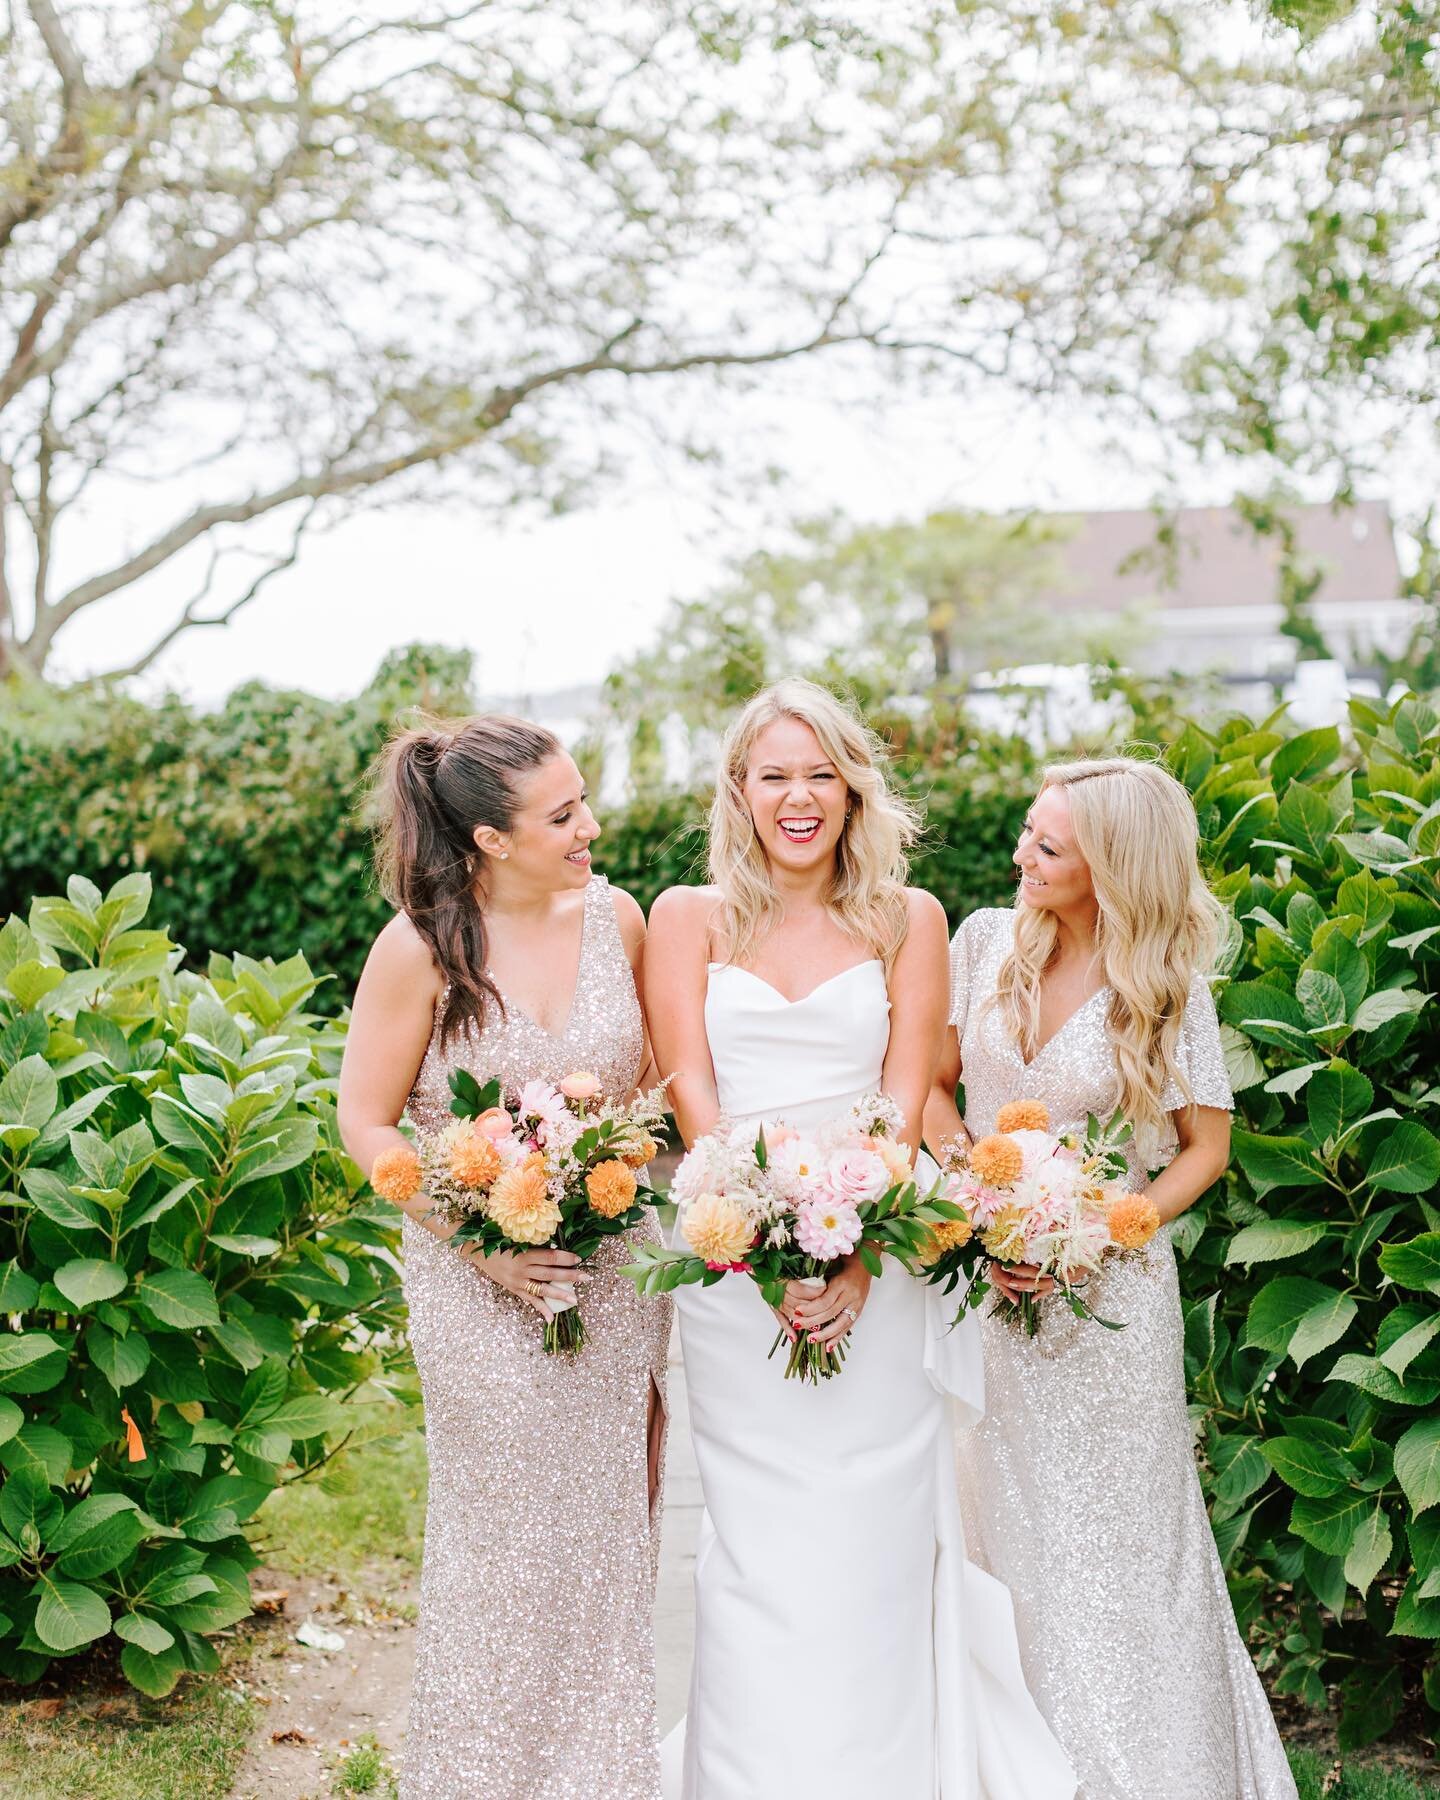 Happy International Women&rsquo;s Day! &ldquo;A woman should be two things: who and what she wants&rdquo; - Coco Chanel

#hamptonsbride #eastendweddings #women #engaged #libride #luxeweddings #weddingstyle #hamptonsweddingplanner #details #longisland